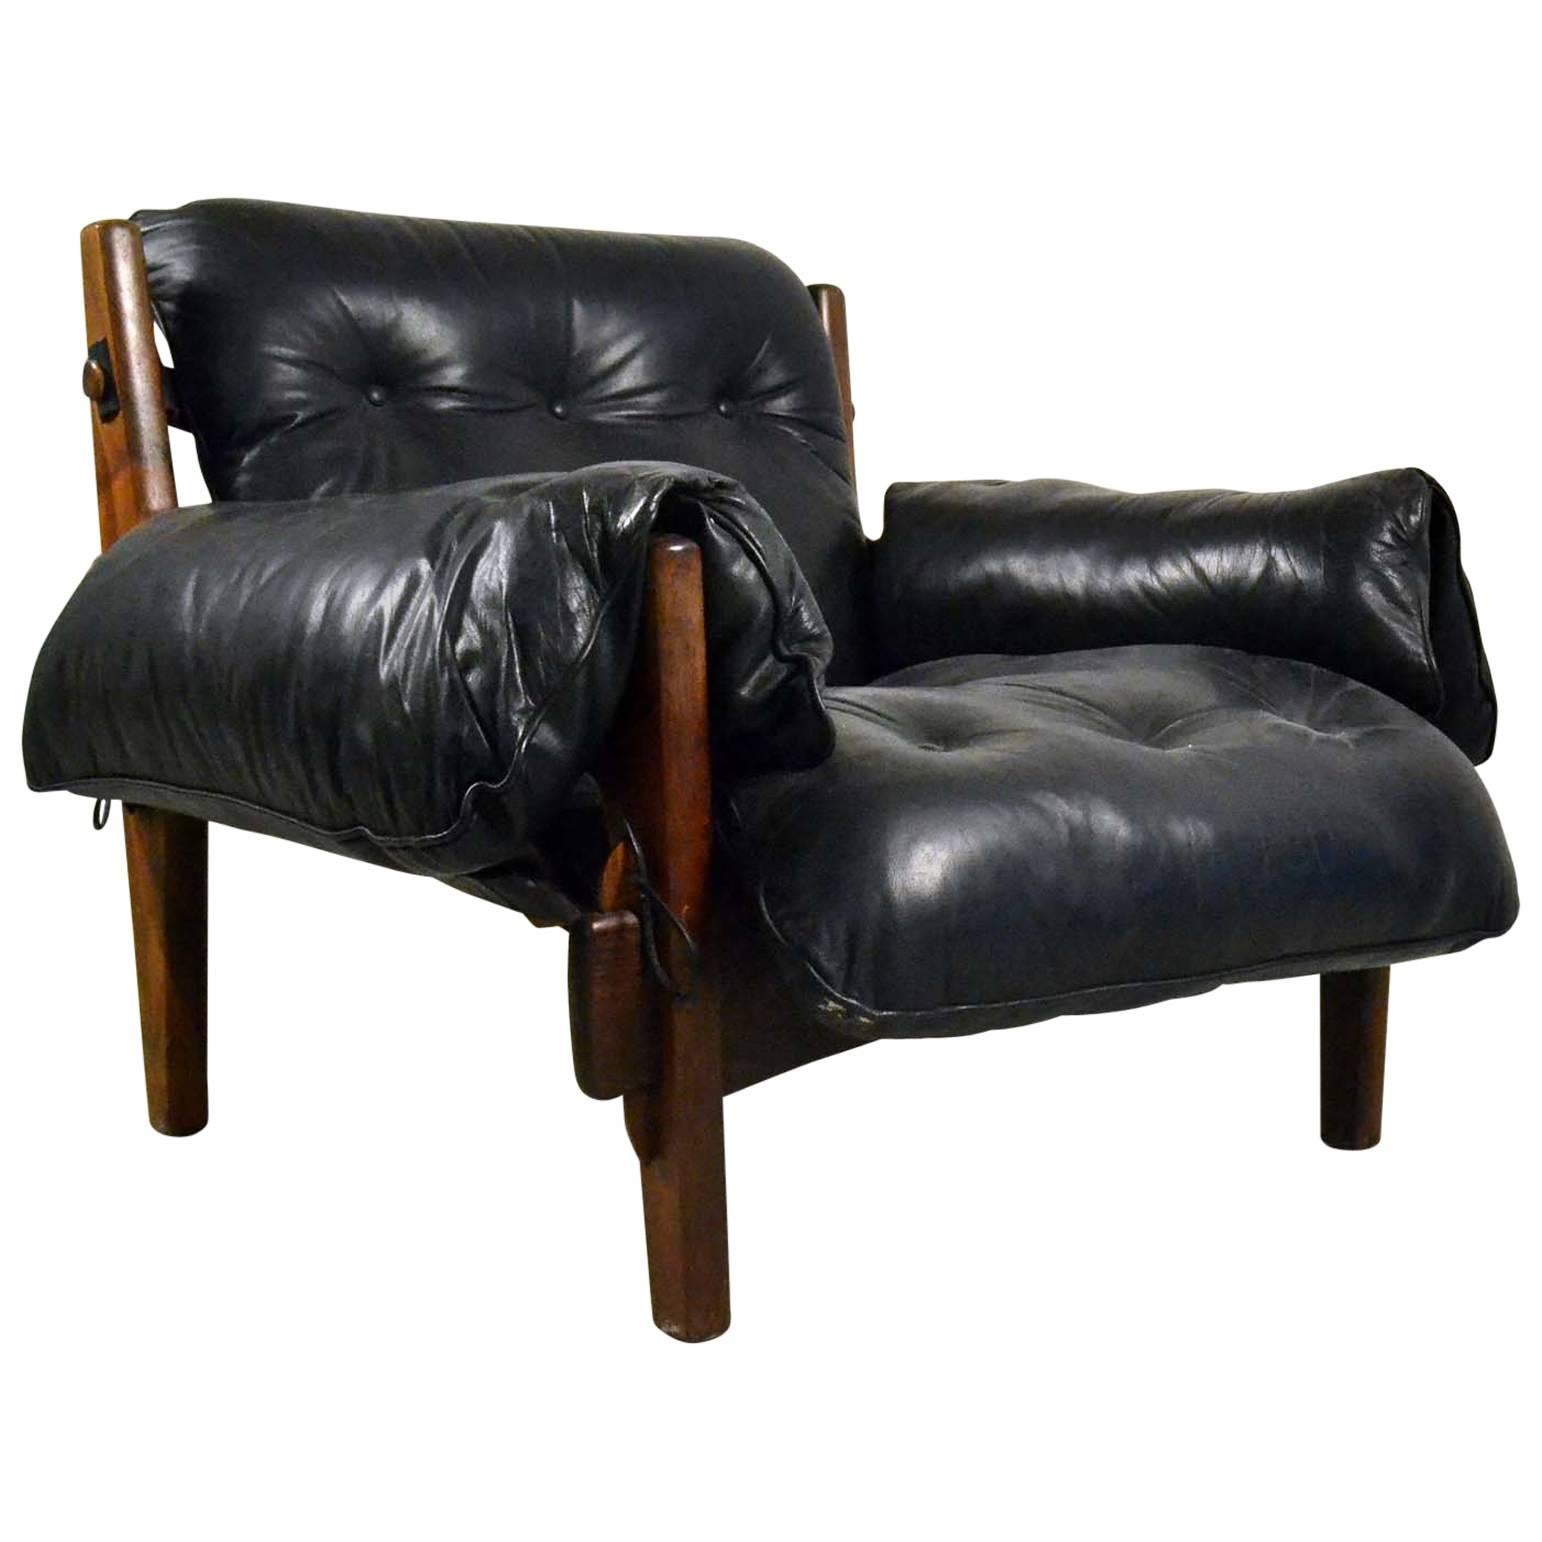 Early Mischievous / Mole Chair by Brazilian Sergio Rodrigues in Black Leather